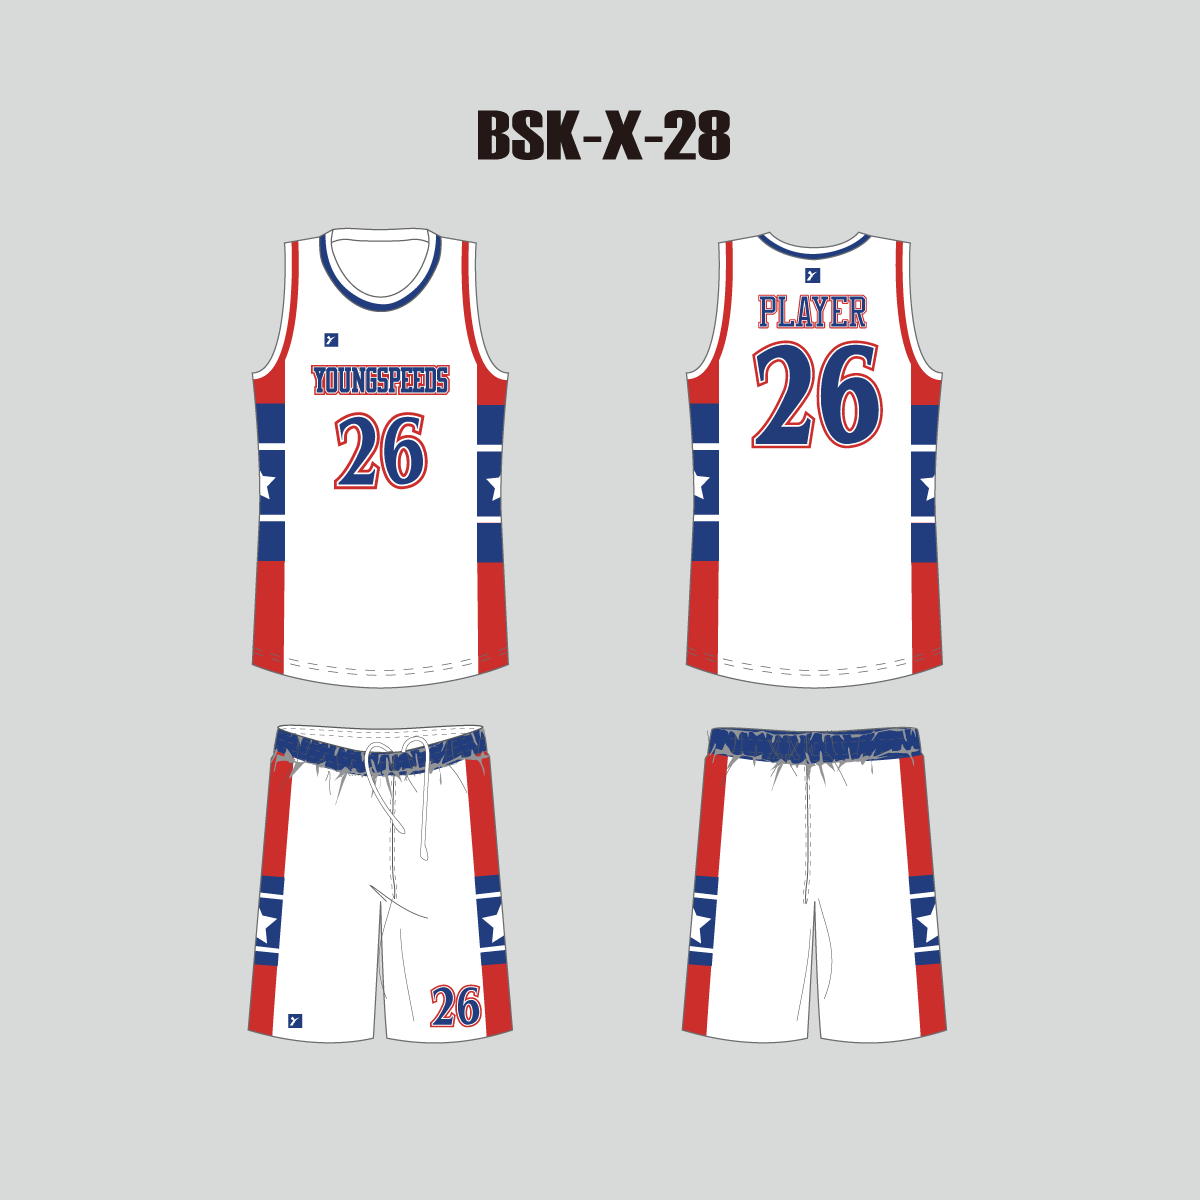 red and blue jersey design